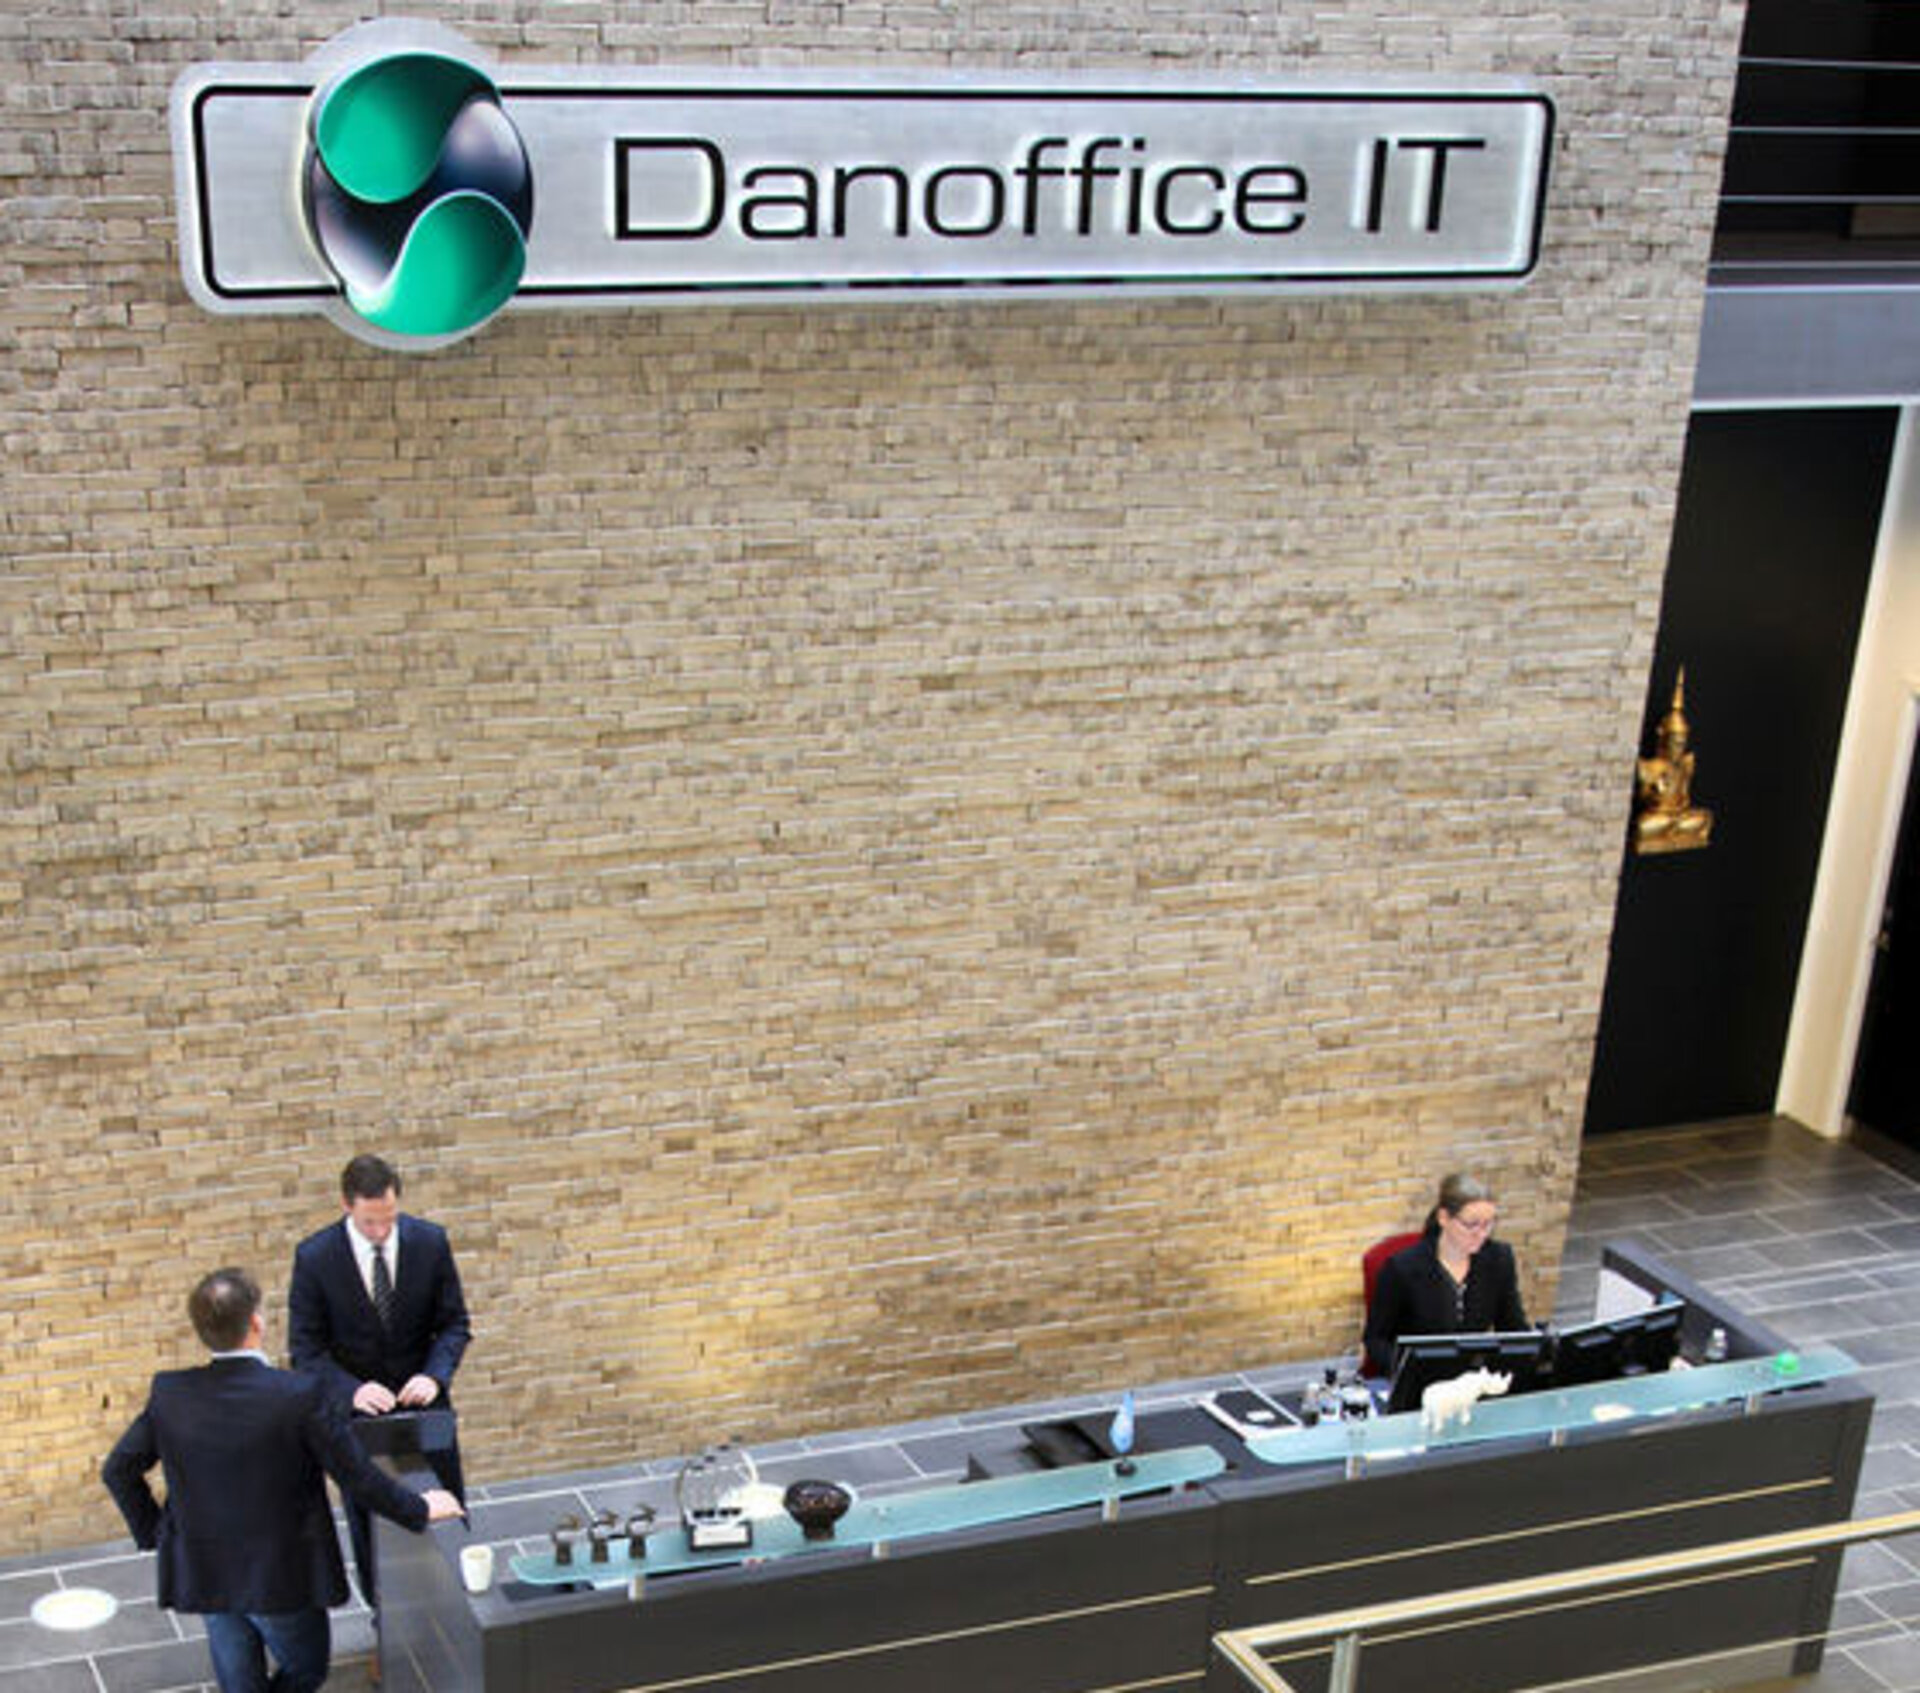 Danoffice IT services and sells professional IT equipment to more than 400 organisations, NGO’s all over the world